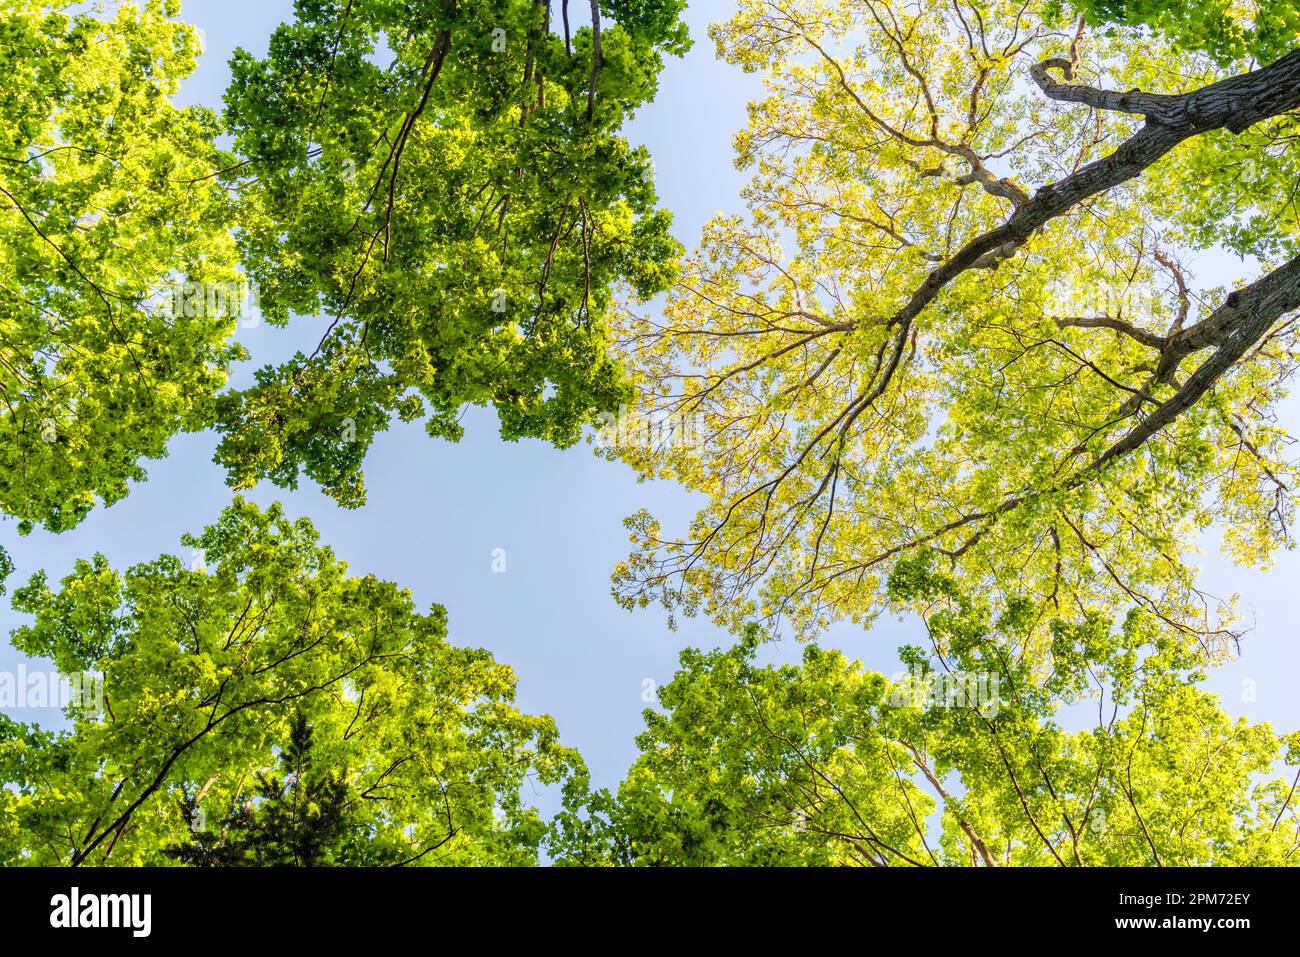 Spring trees, maples Acer  Sp. and oak Quercus sp.looking up at treetops, naturea andl blue sky. Resilience, strength and beauty spring background. Stock Photo